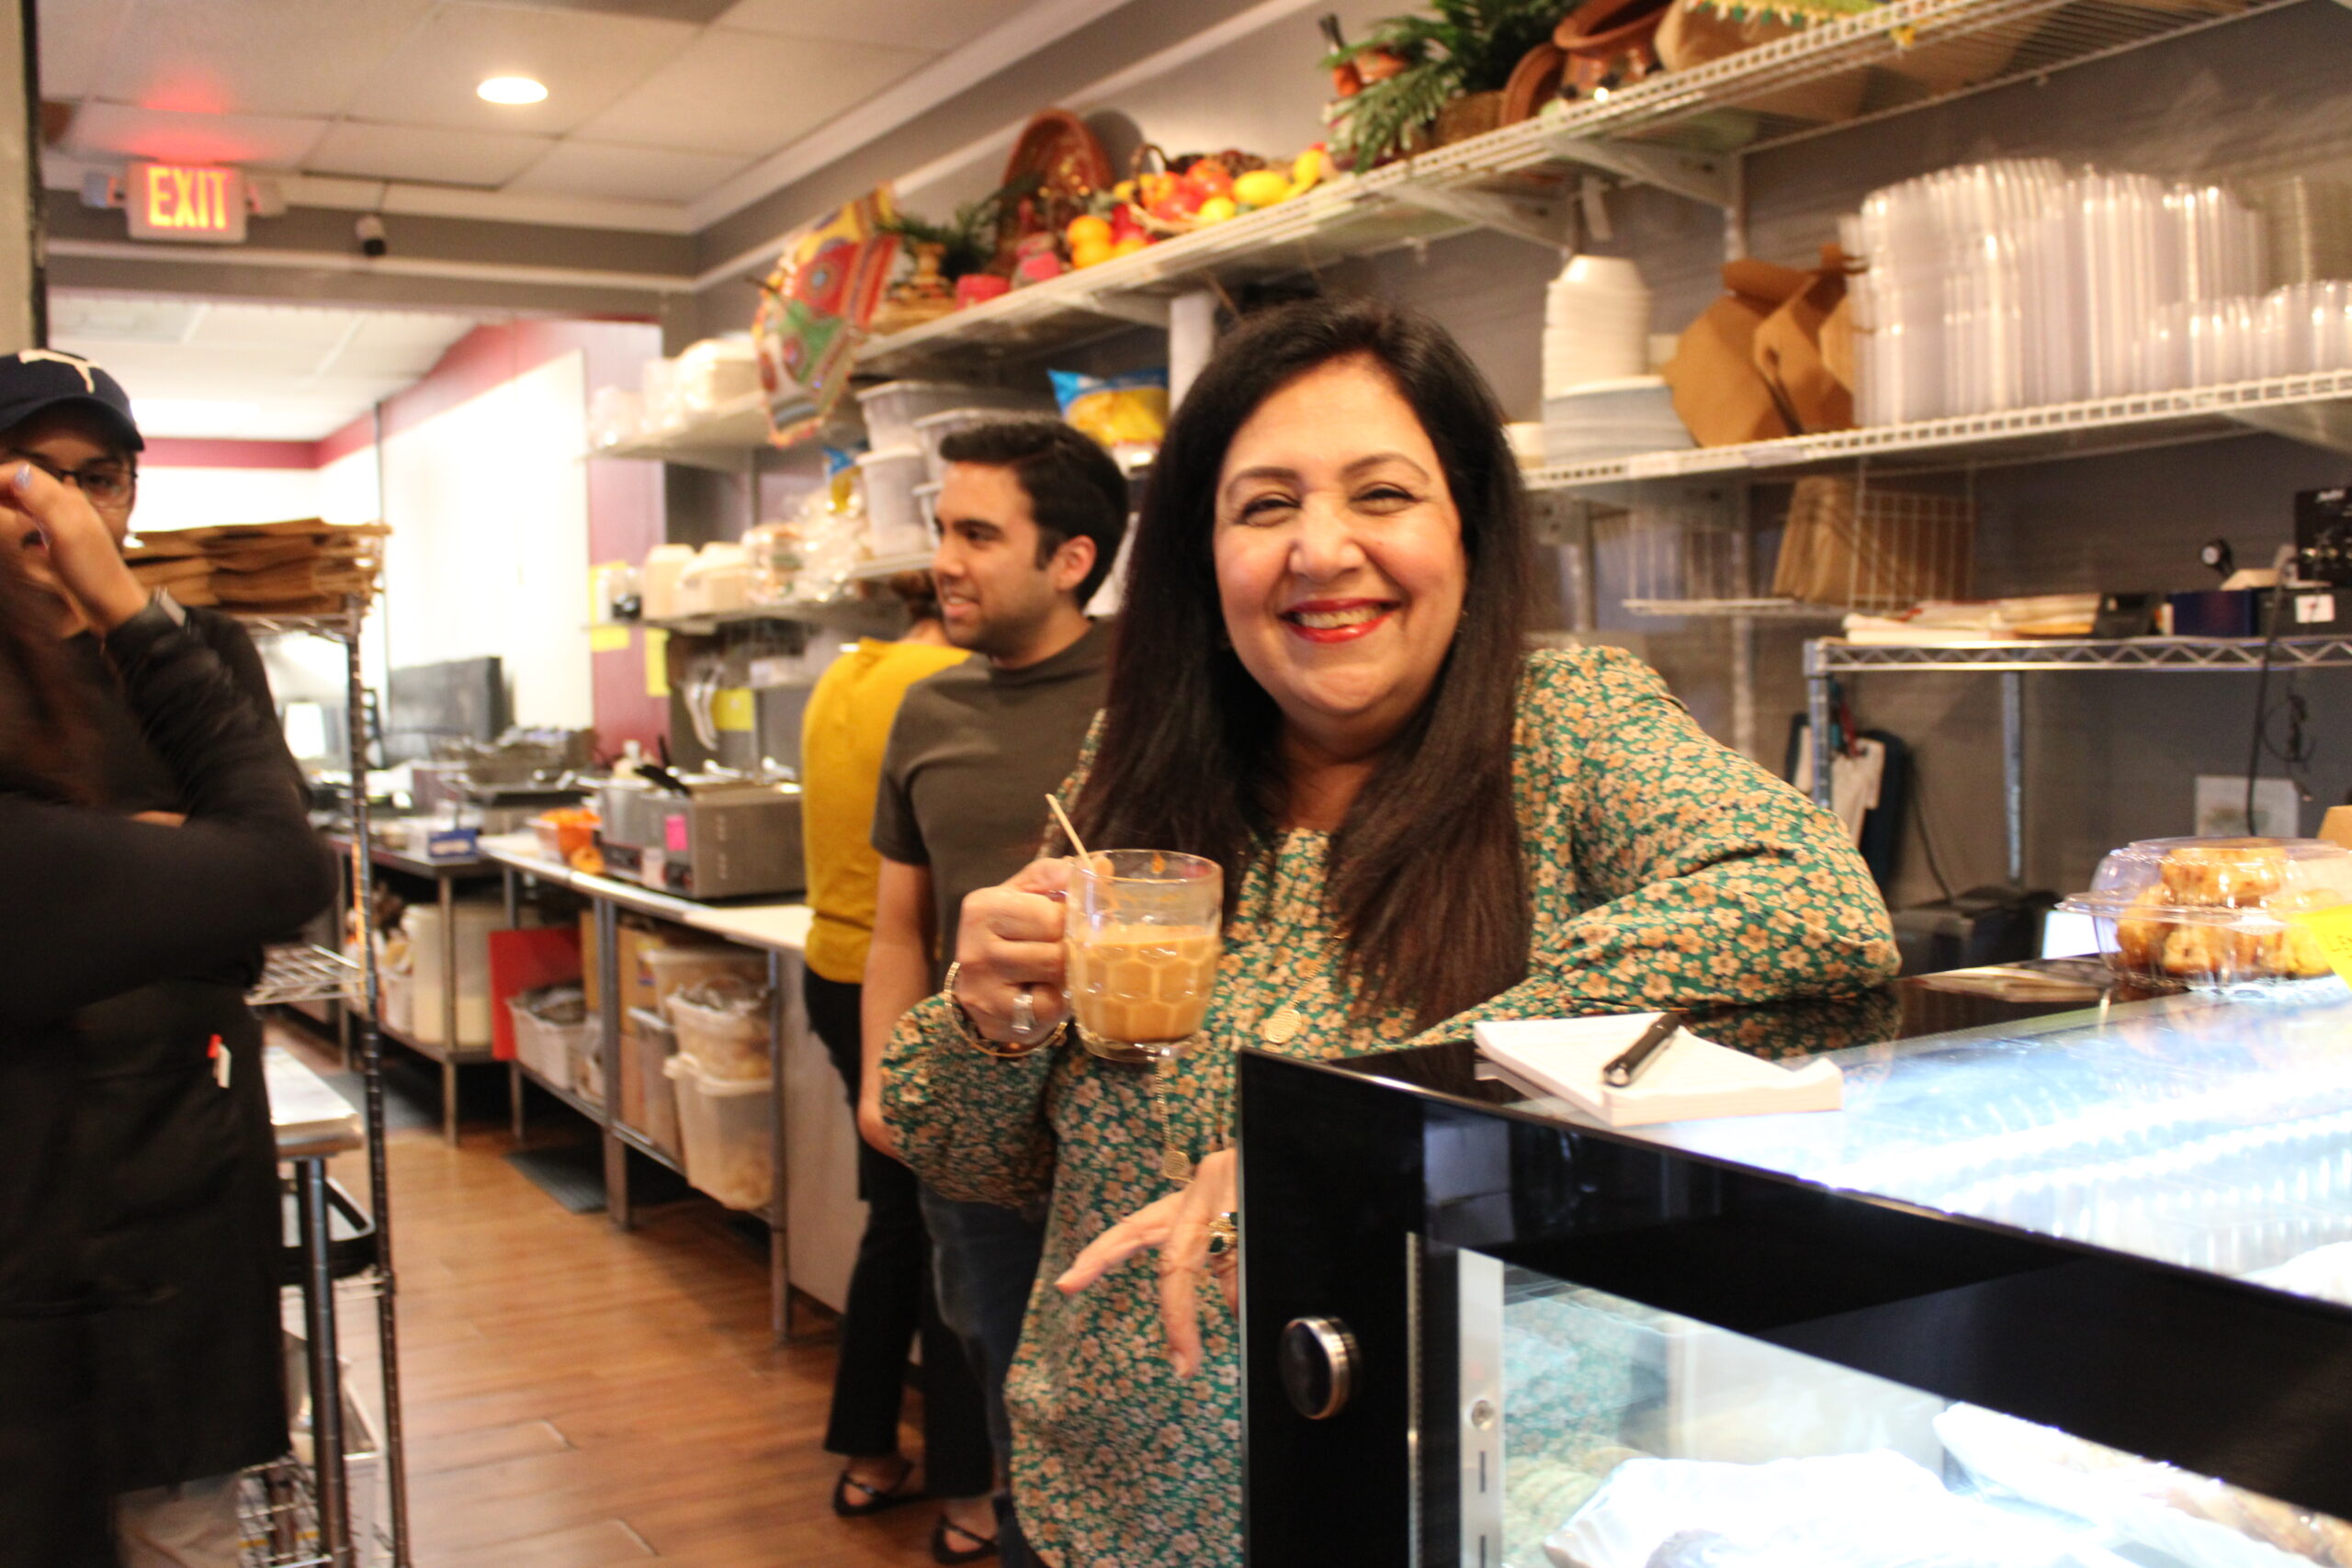 Farah Mehmood, co-owner of Dil Bahar Cafe and wife of Azhar Mehmood